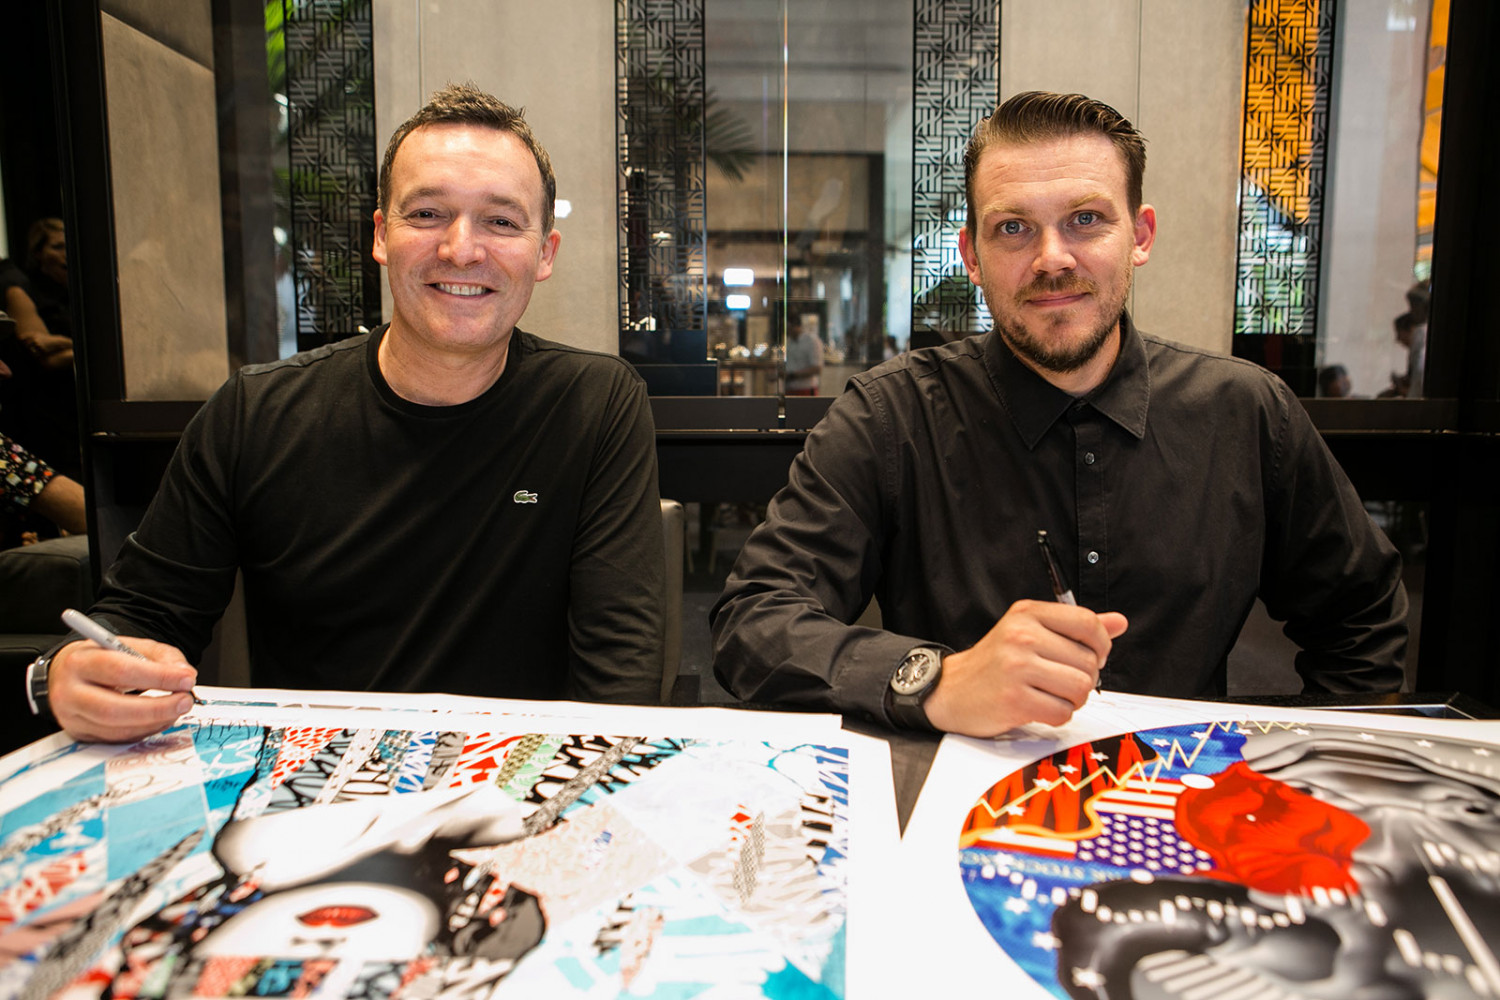 Hublot partners with street artists Hush and Tristan Eaton